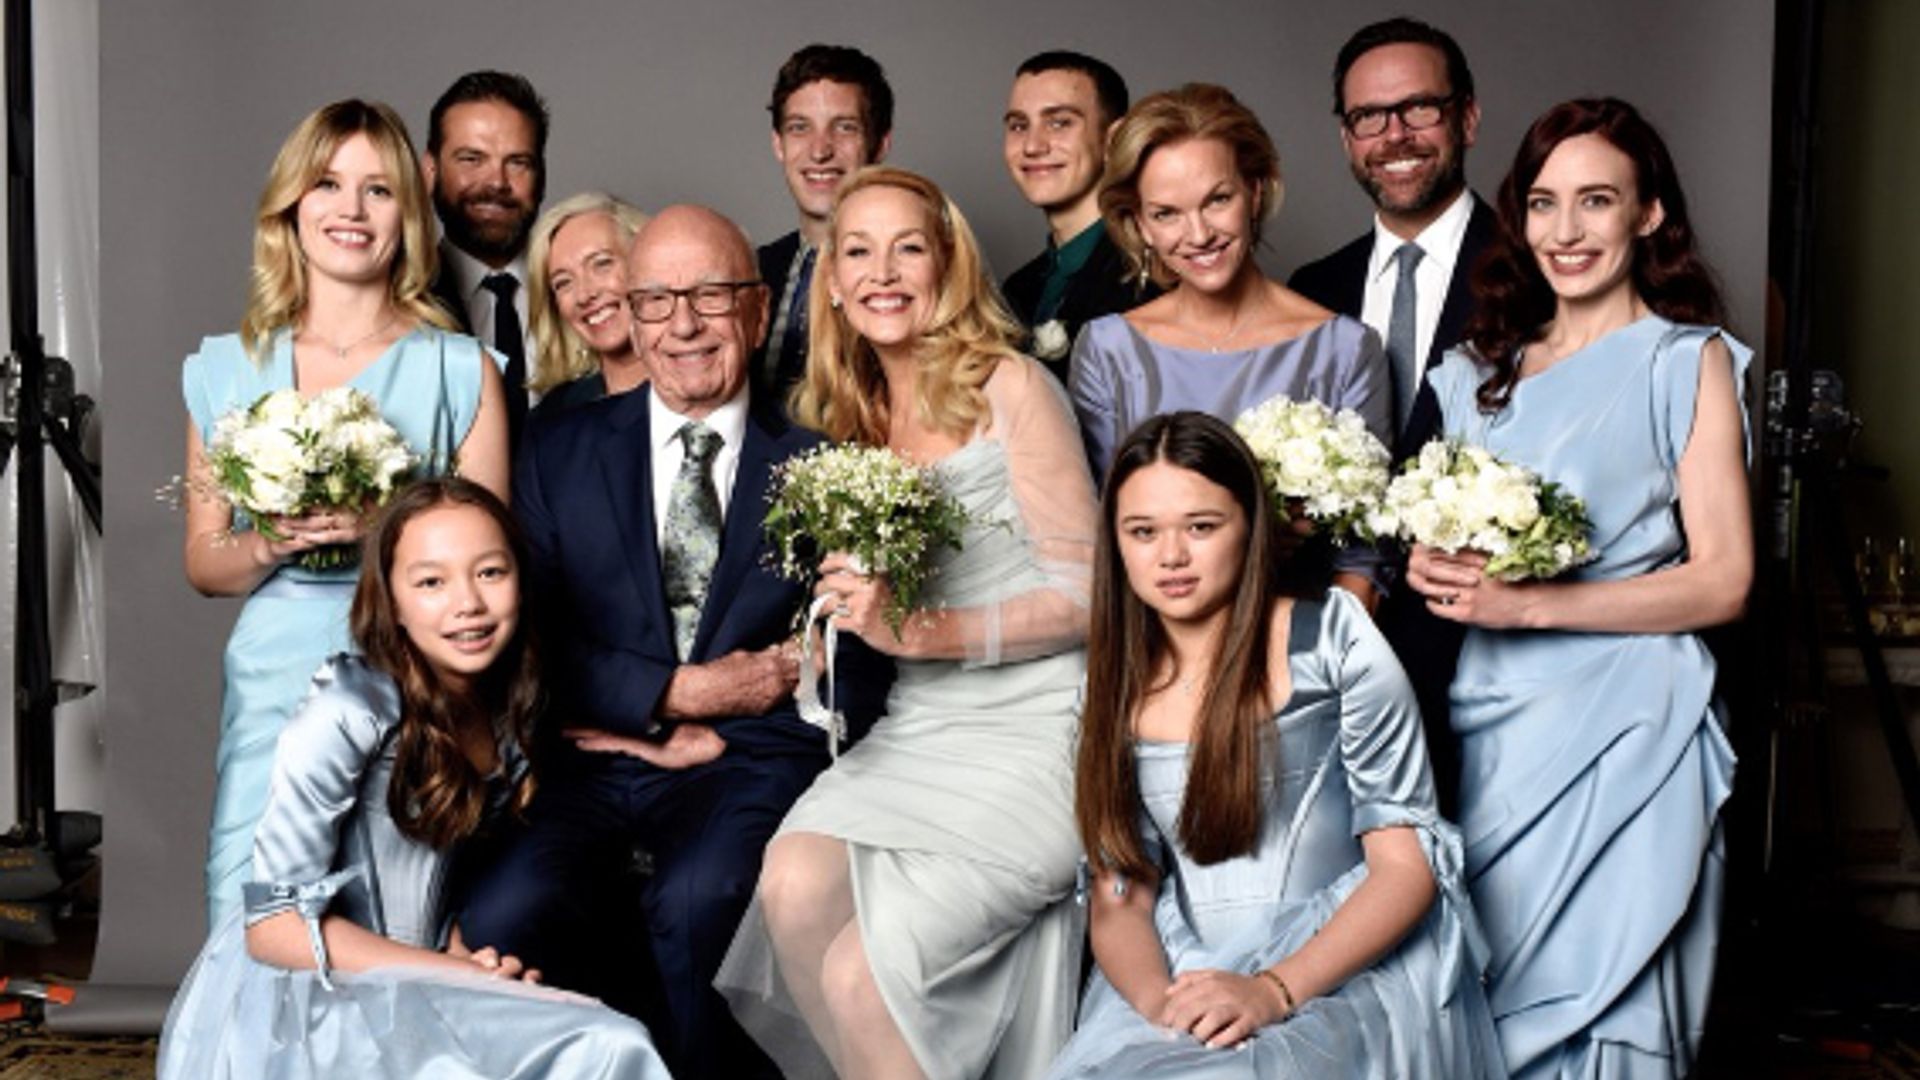 Jerry Hall shares photos of her 'beautiful' family wedding day